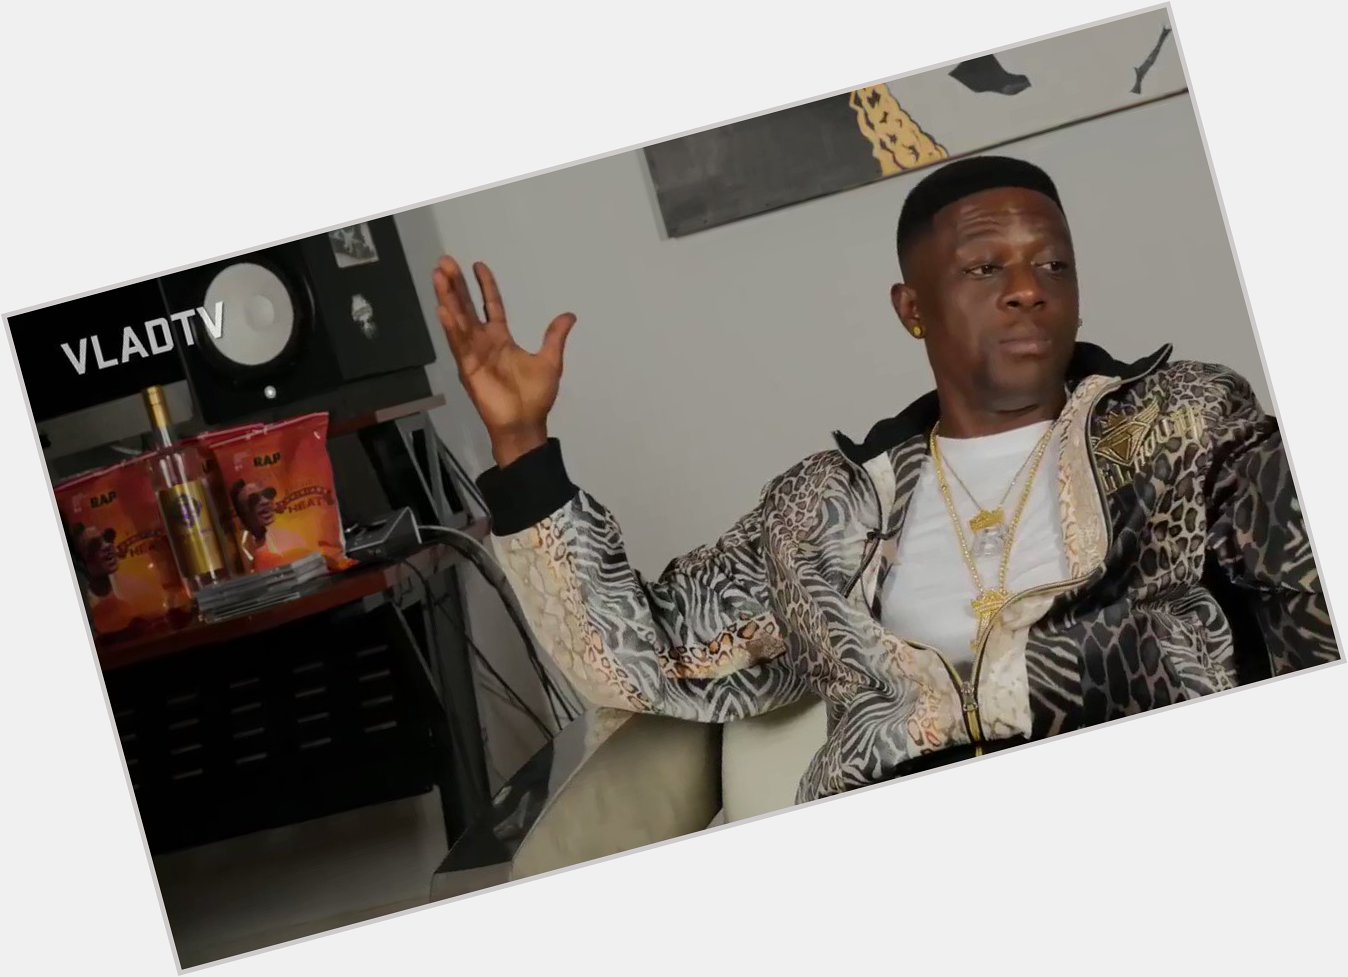  You bitches catchin\ a fade, shout out my nigga Lil Boosie  Happy 35th Birthday   